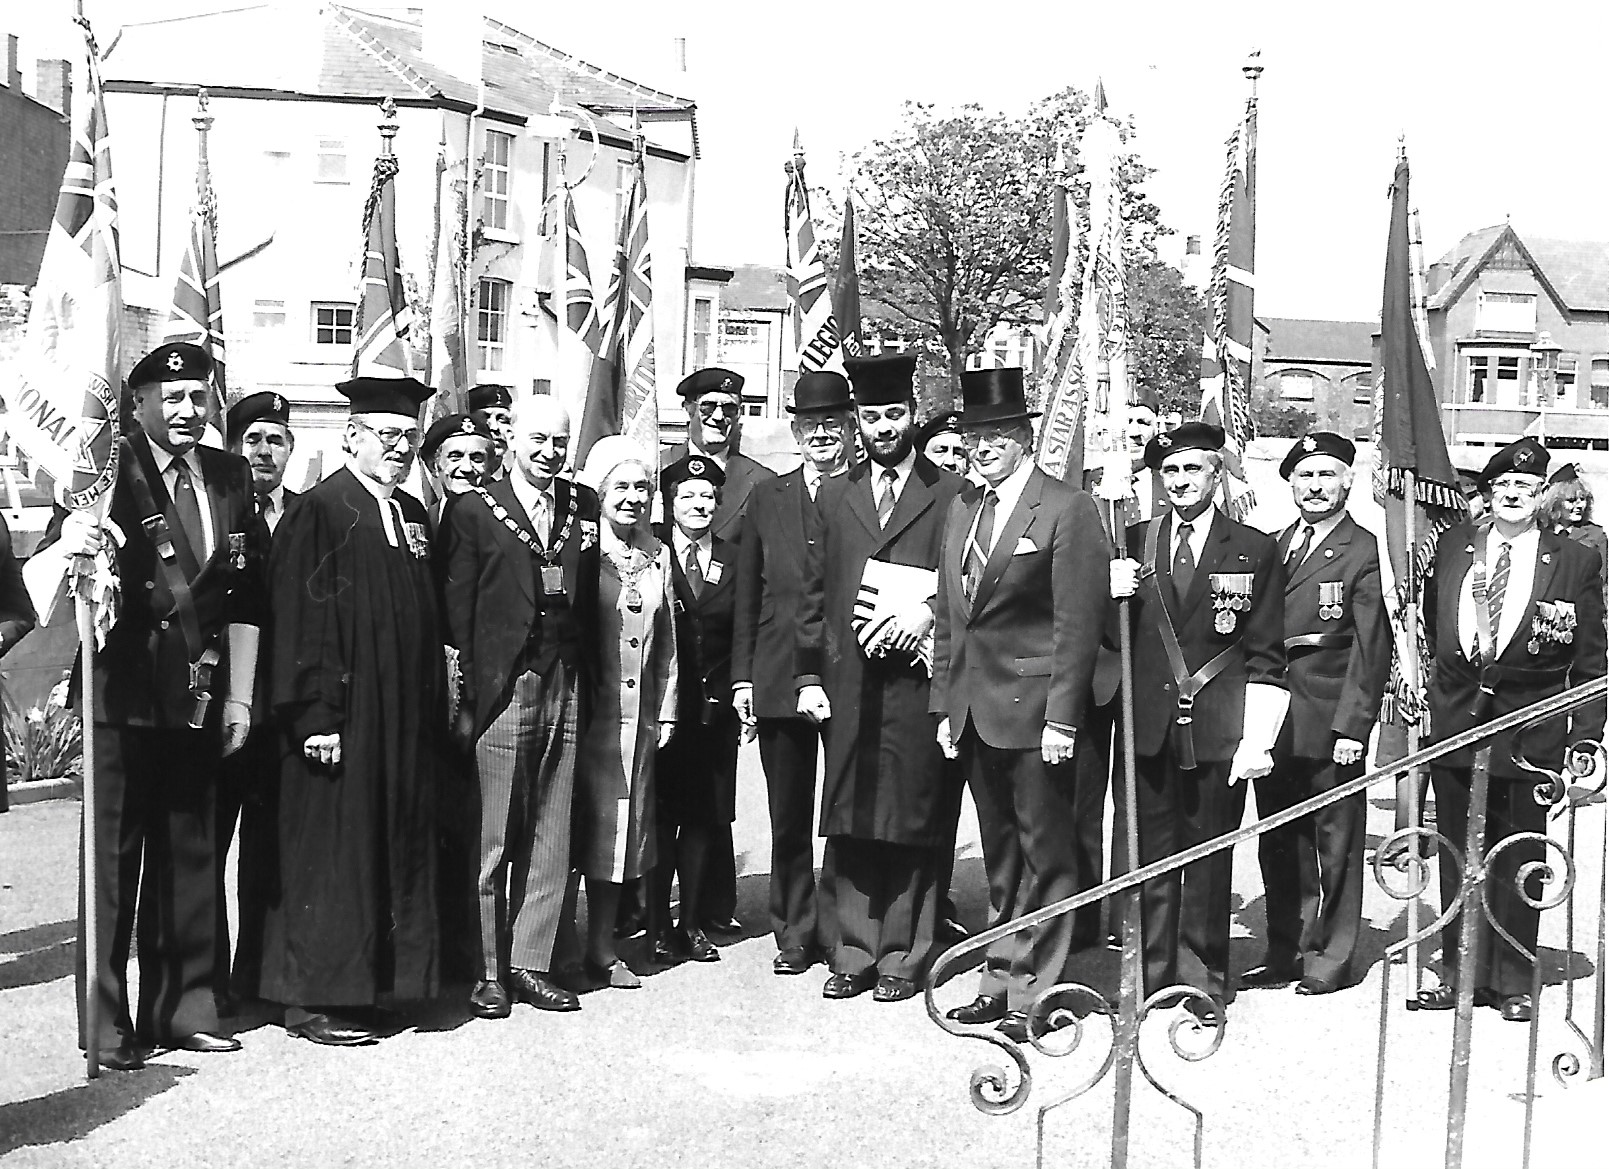 Members of the Association of Jewish Ex Servicemen (AJEX) enjoy an event in Southport in May 1982